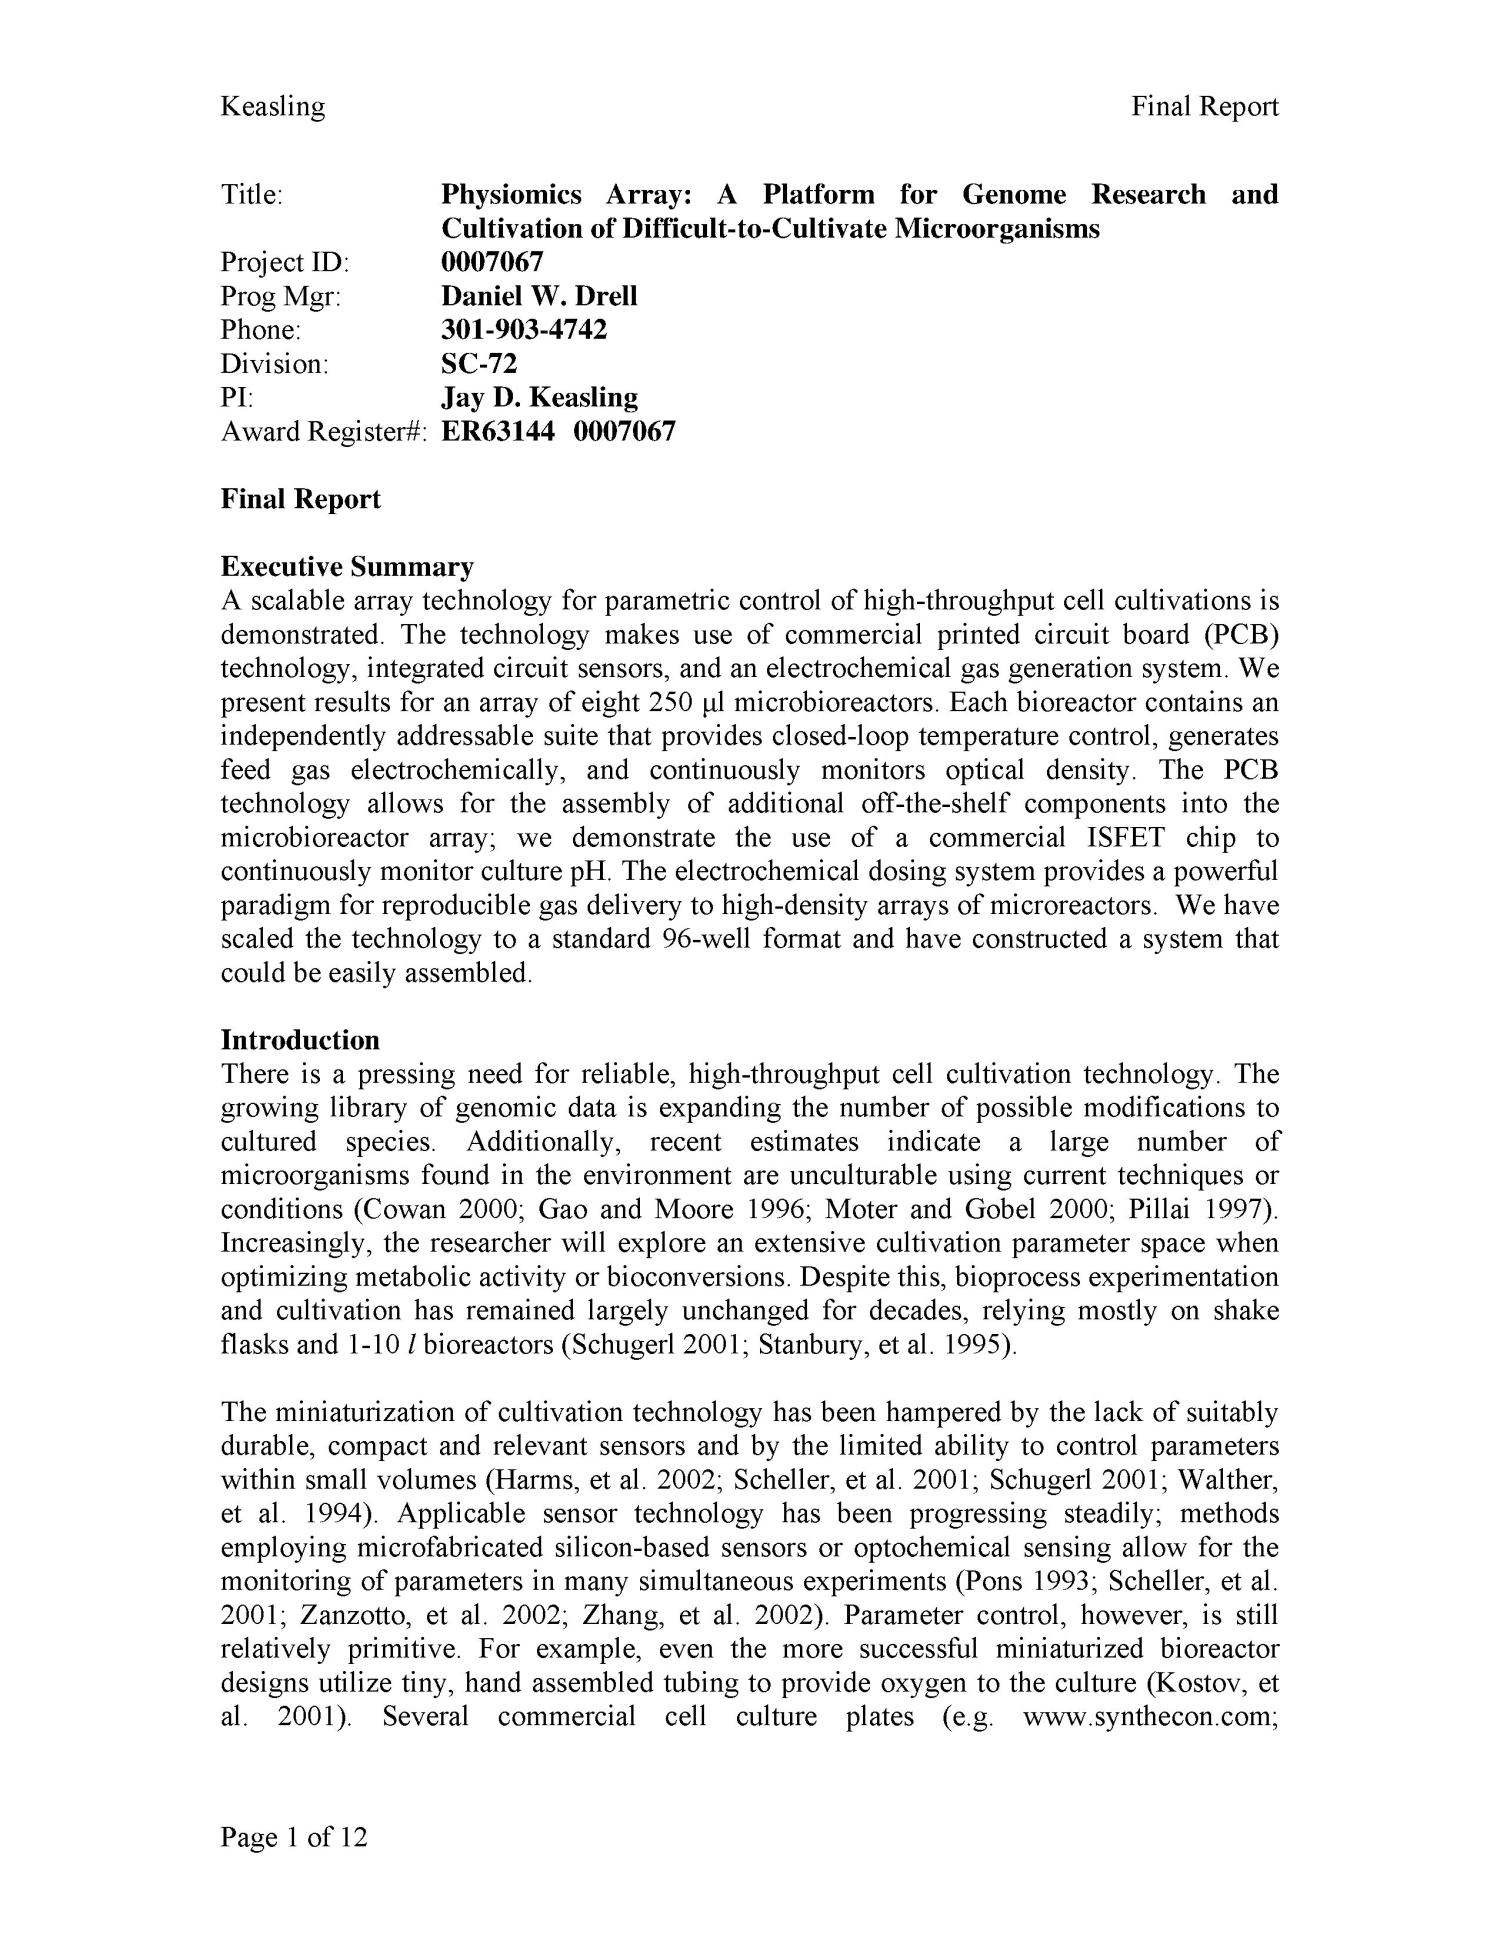 Physiomics Array: A Platform for Genome Research and Cultivation of Difficult-to-Cultivate Microorganisms Final Technical Report
                                                
                                                    [Sequence #]: 1 of 12
                                                